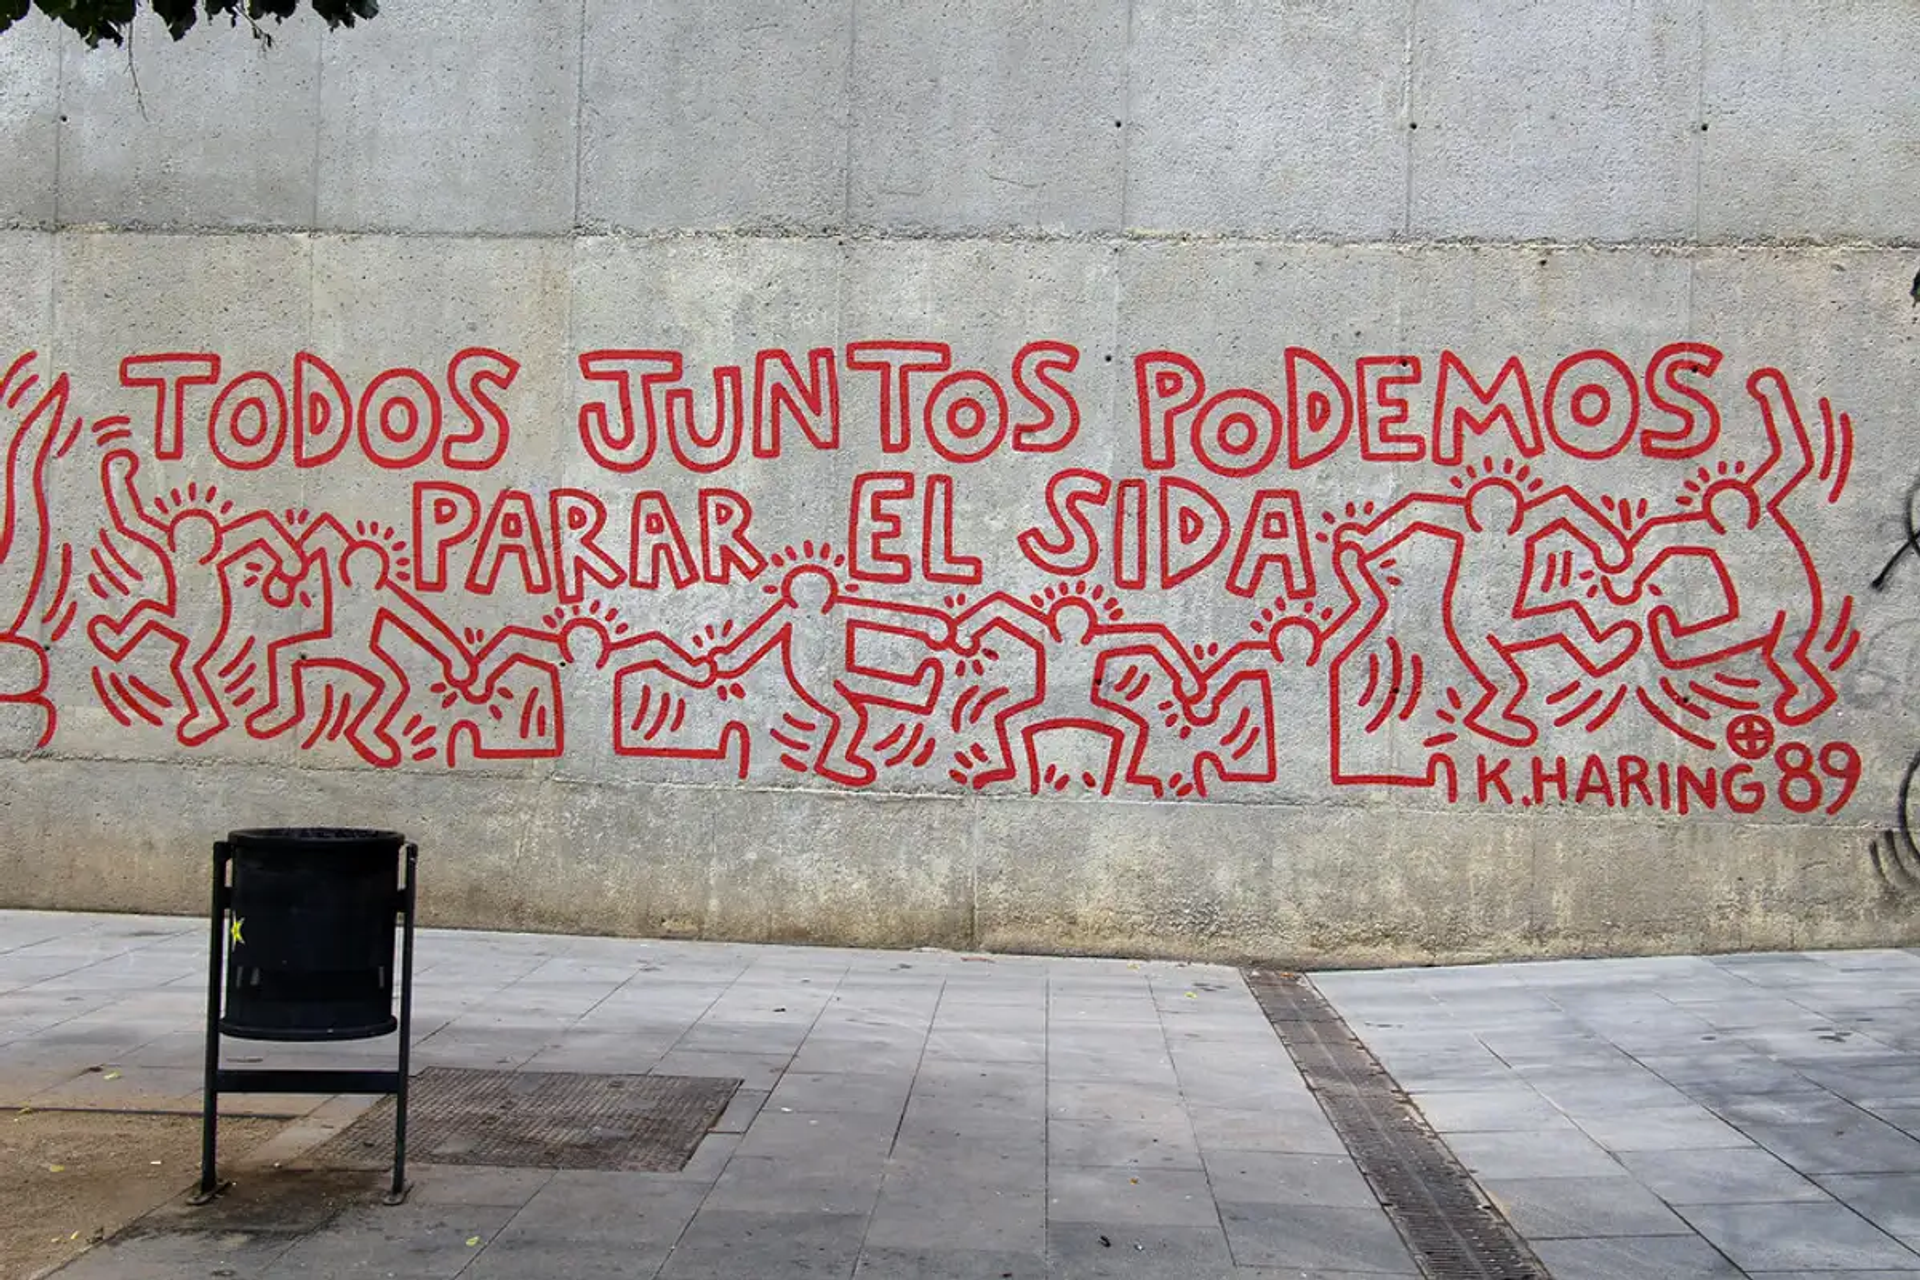 A reproduction of a mural by Keith Haring in bold red lines with his signature figures. The phrase "together we can stop AIDS" is written in Spanish.